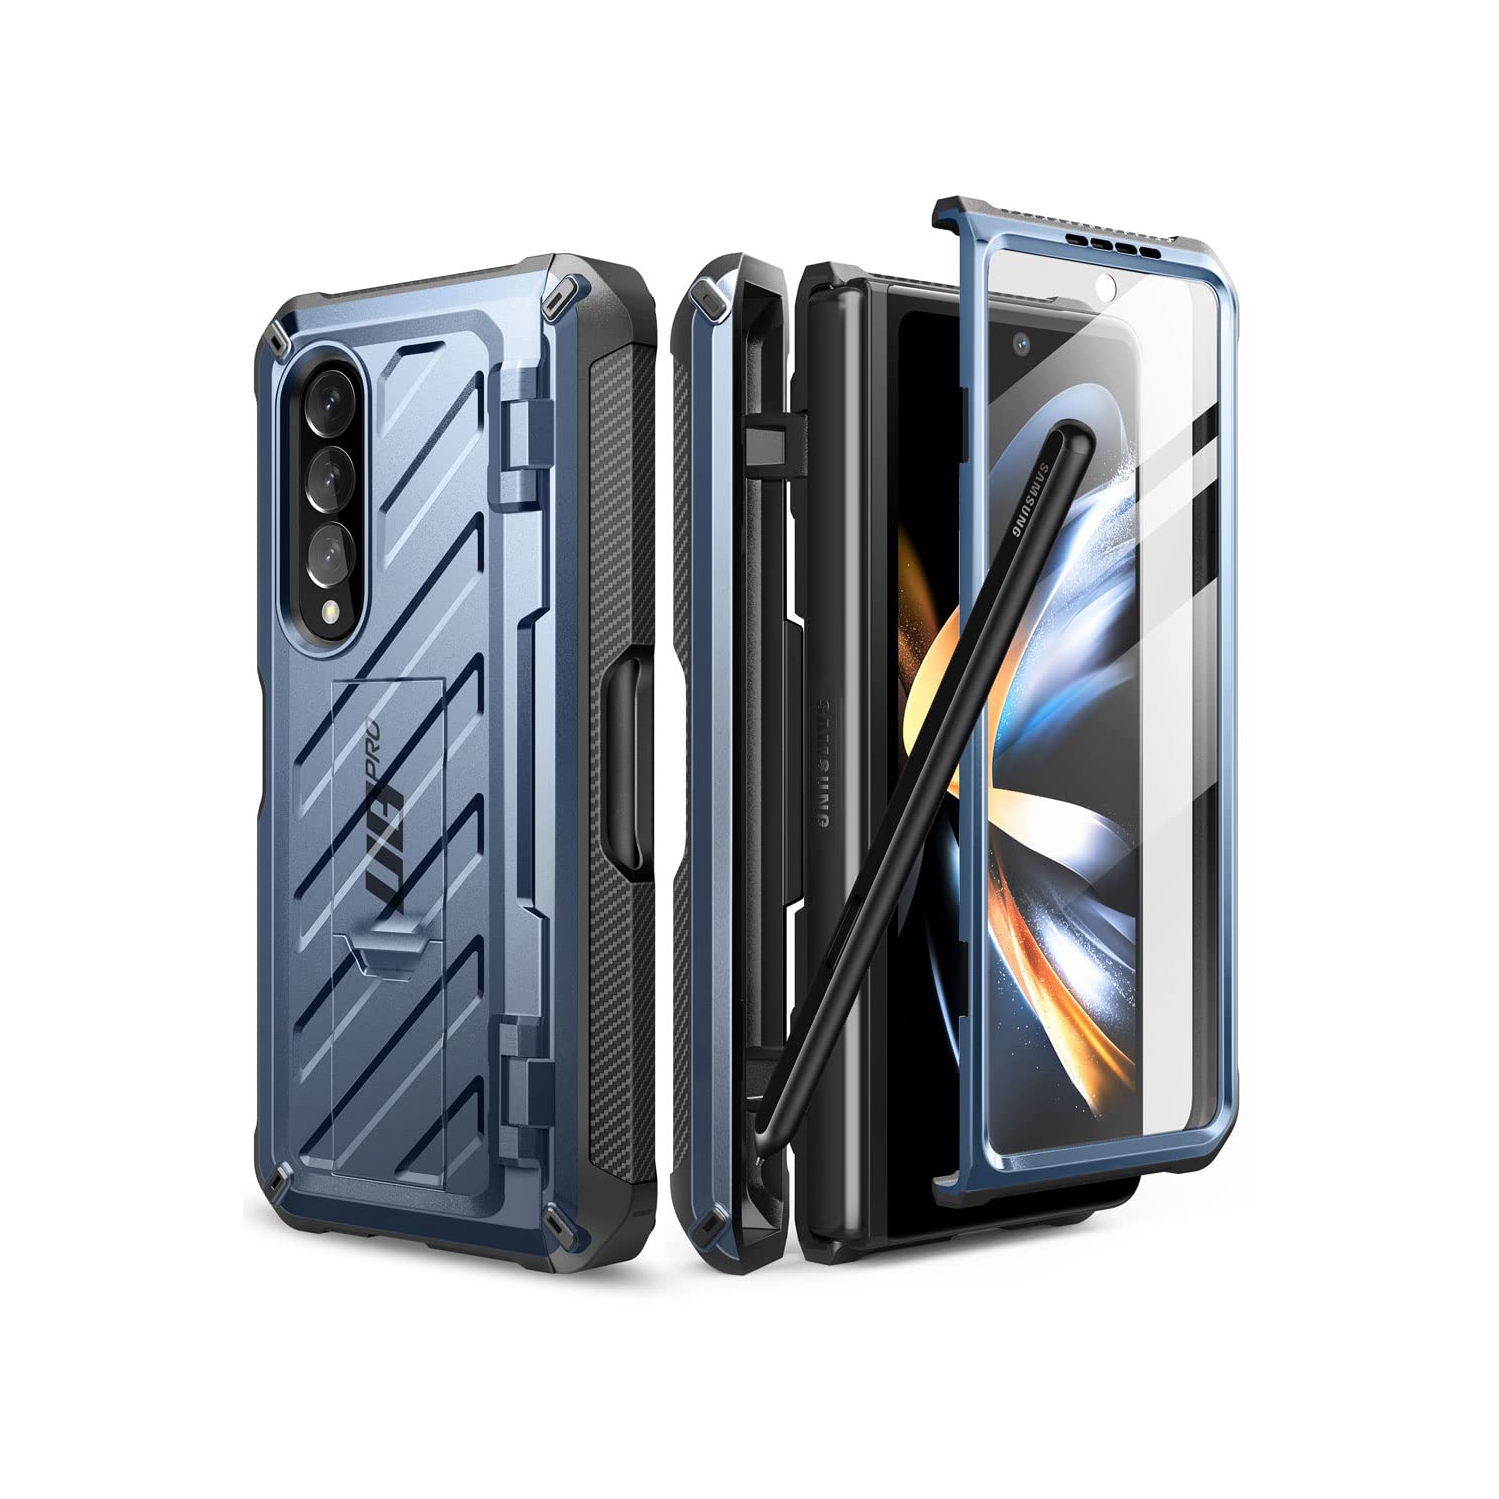 SUPCASE Unicorn Beetle Pro Case for Samsung Galaxy Z Fold 4 5G (2022), Full-Body Dual Layer Rugged Case with Built-in Screen